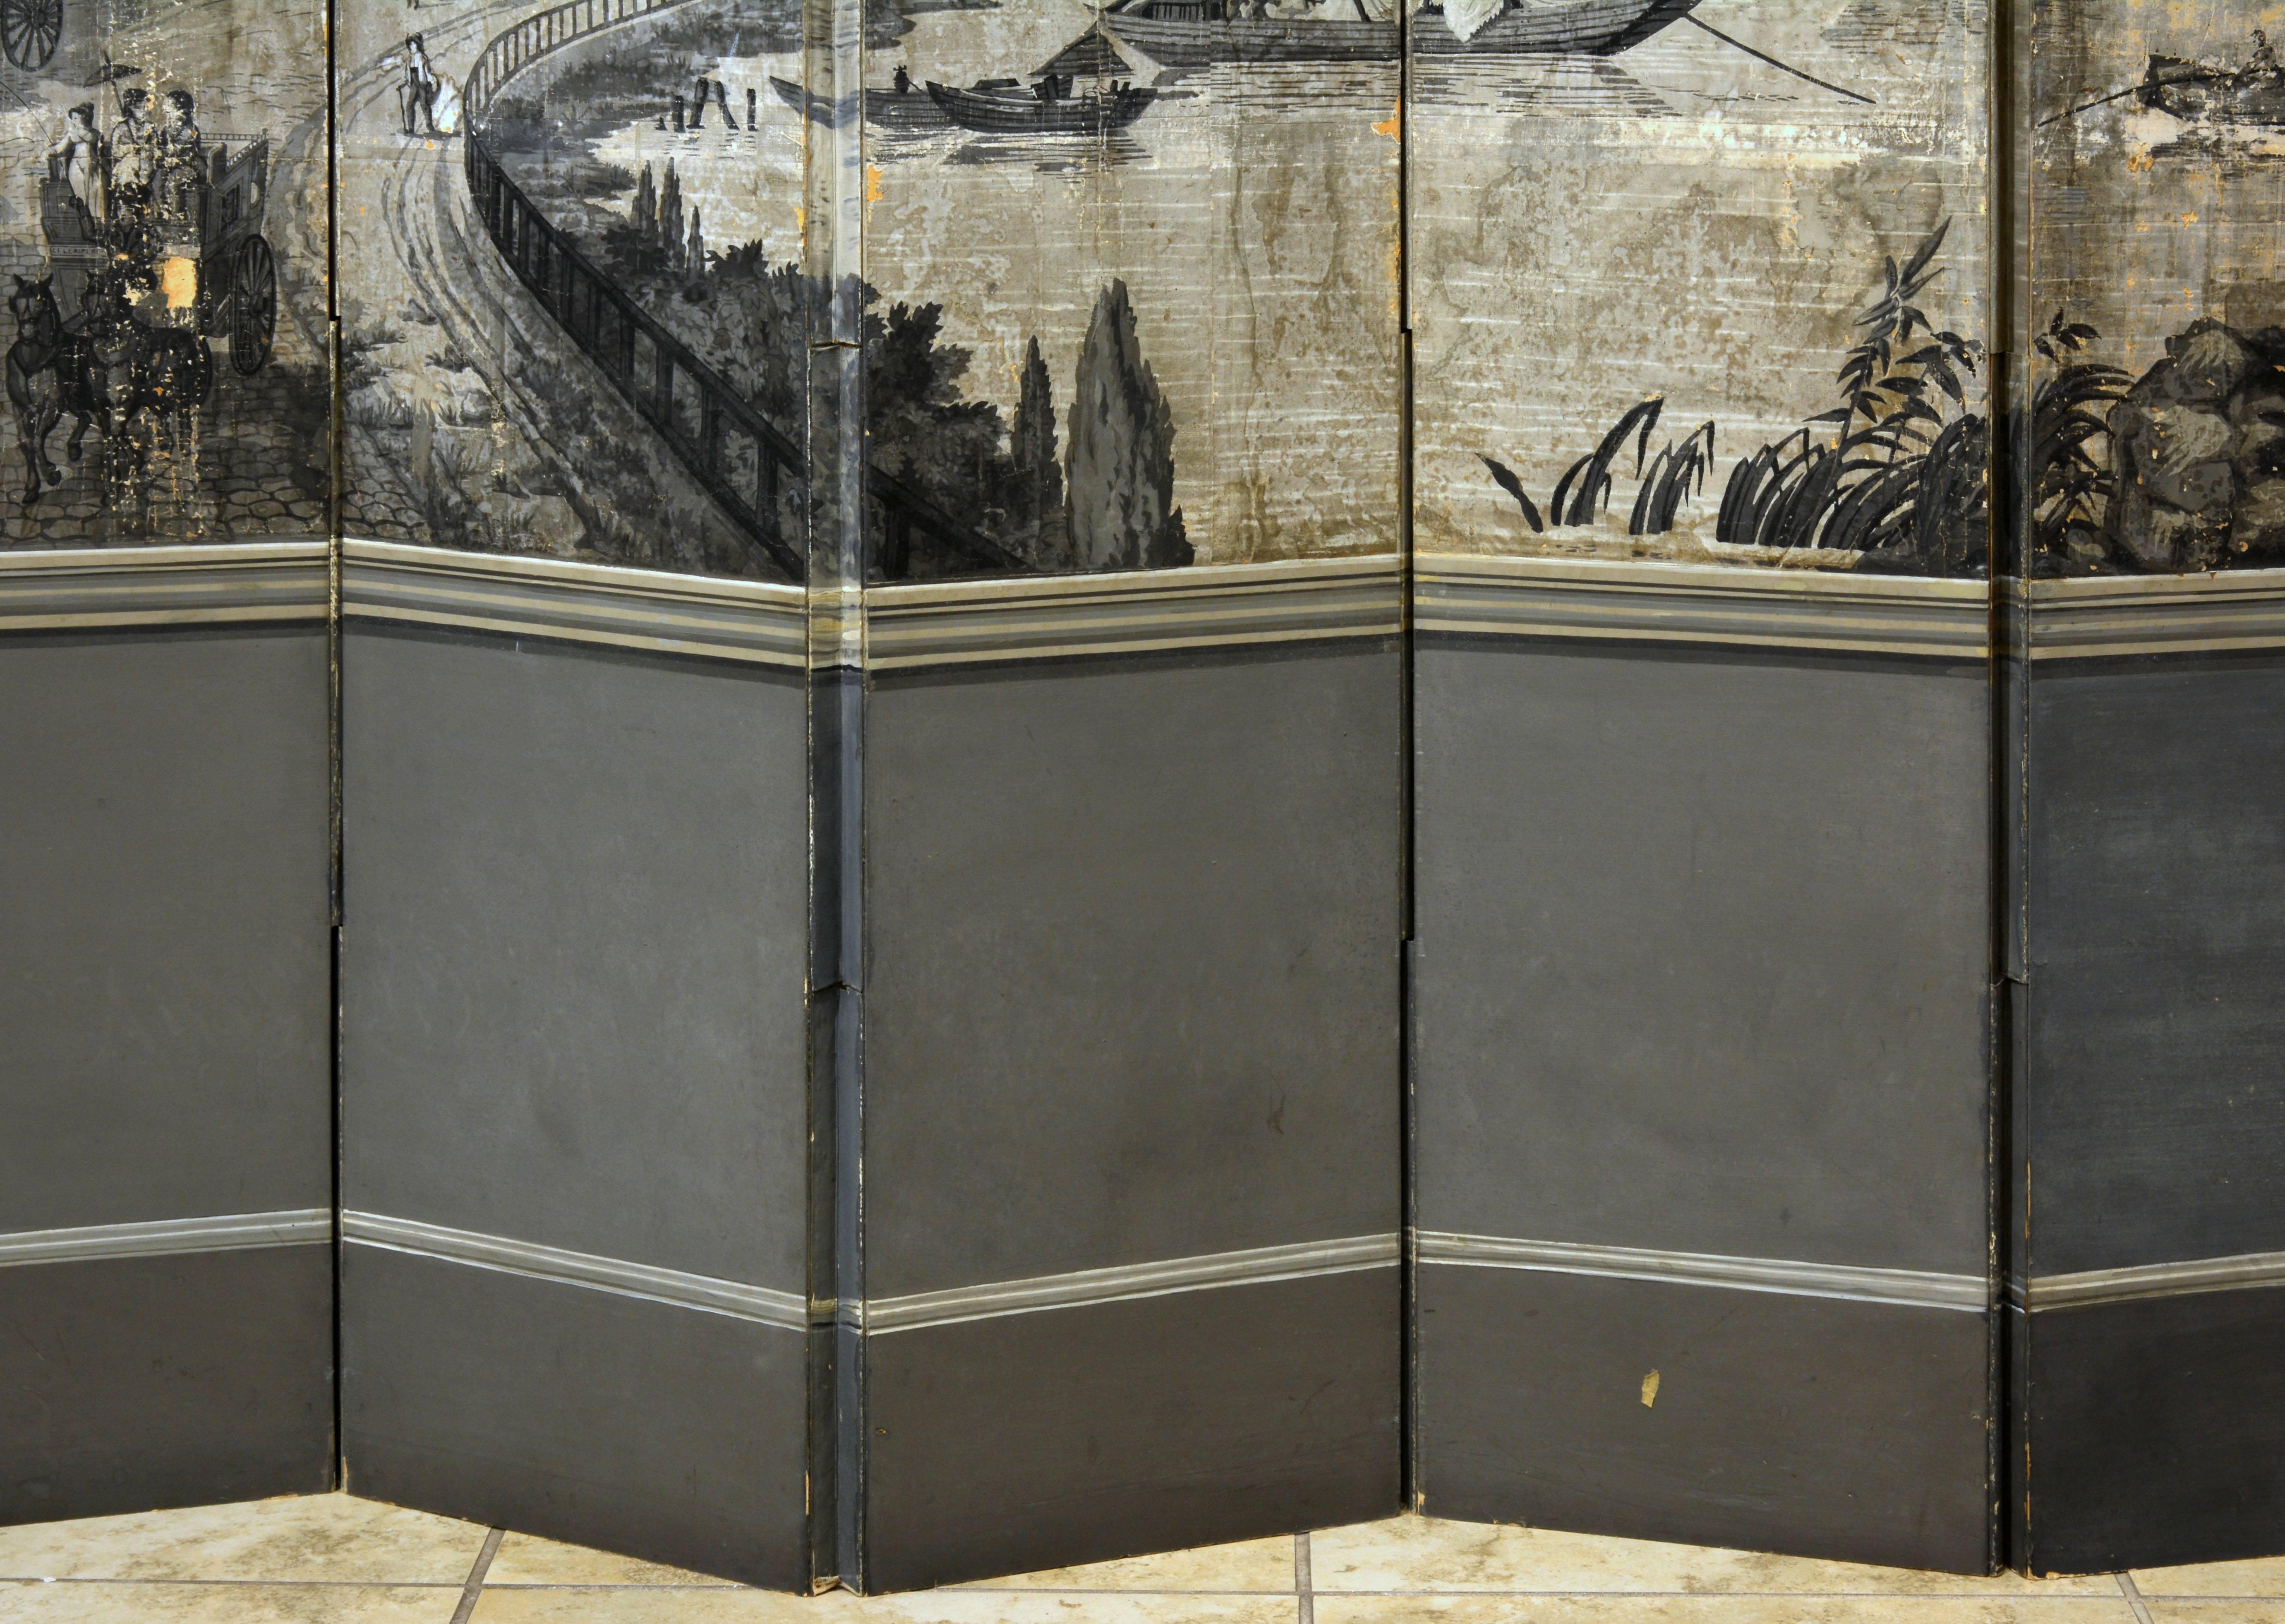 Standing 95.5 inches tall this fine French wall screen features a panoramic landscape with mansions, houses, river, horse carriages etc. The bottom part is painted in a three dimensional way to simulate panels. The back of the screen is painted